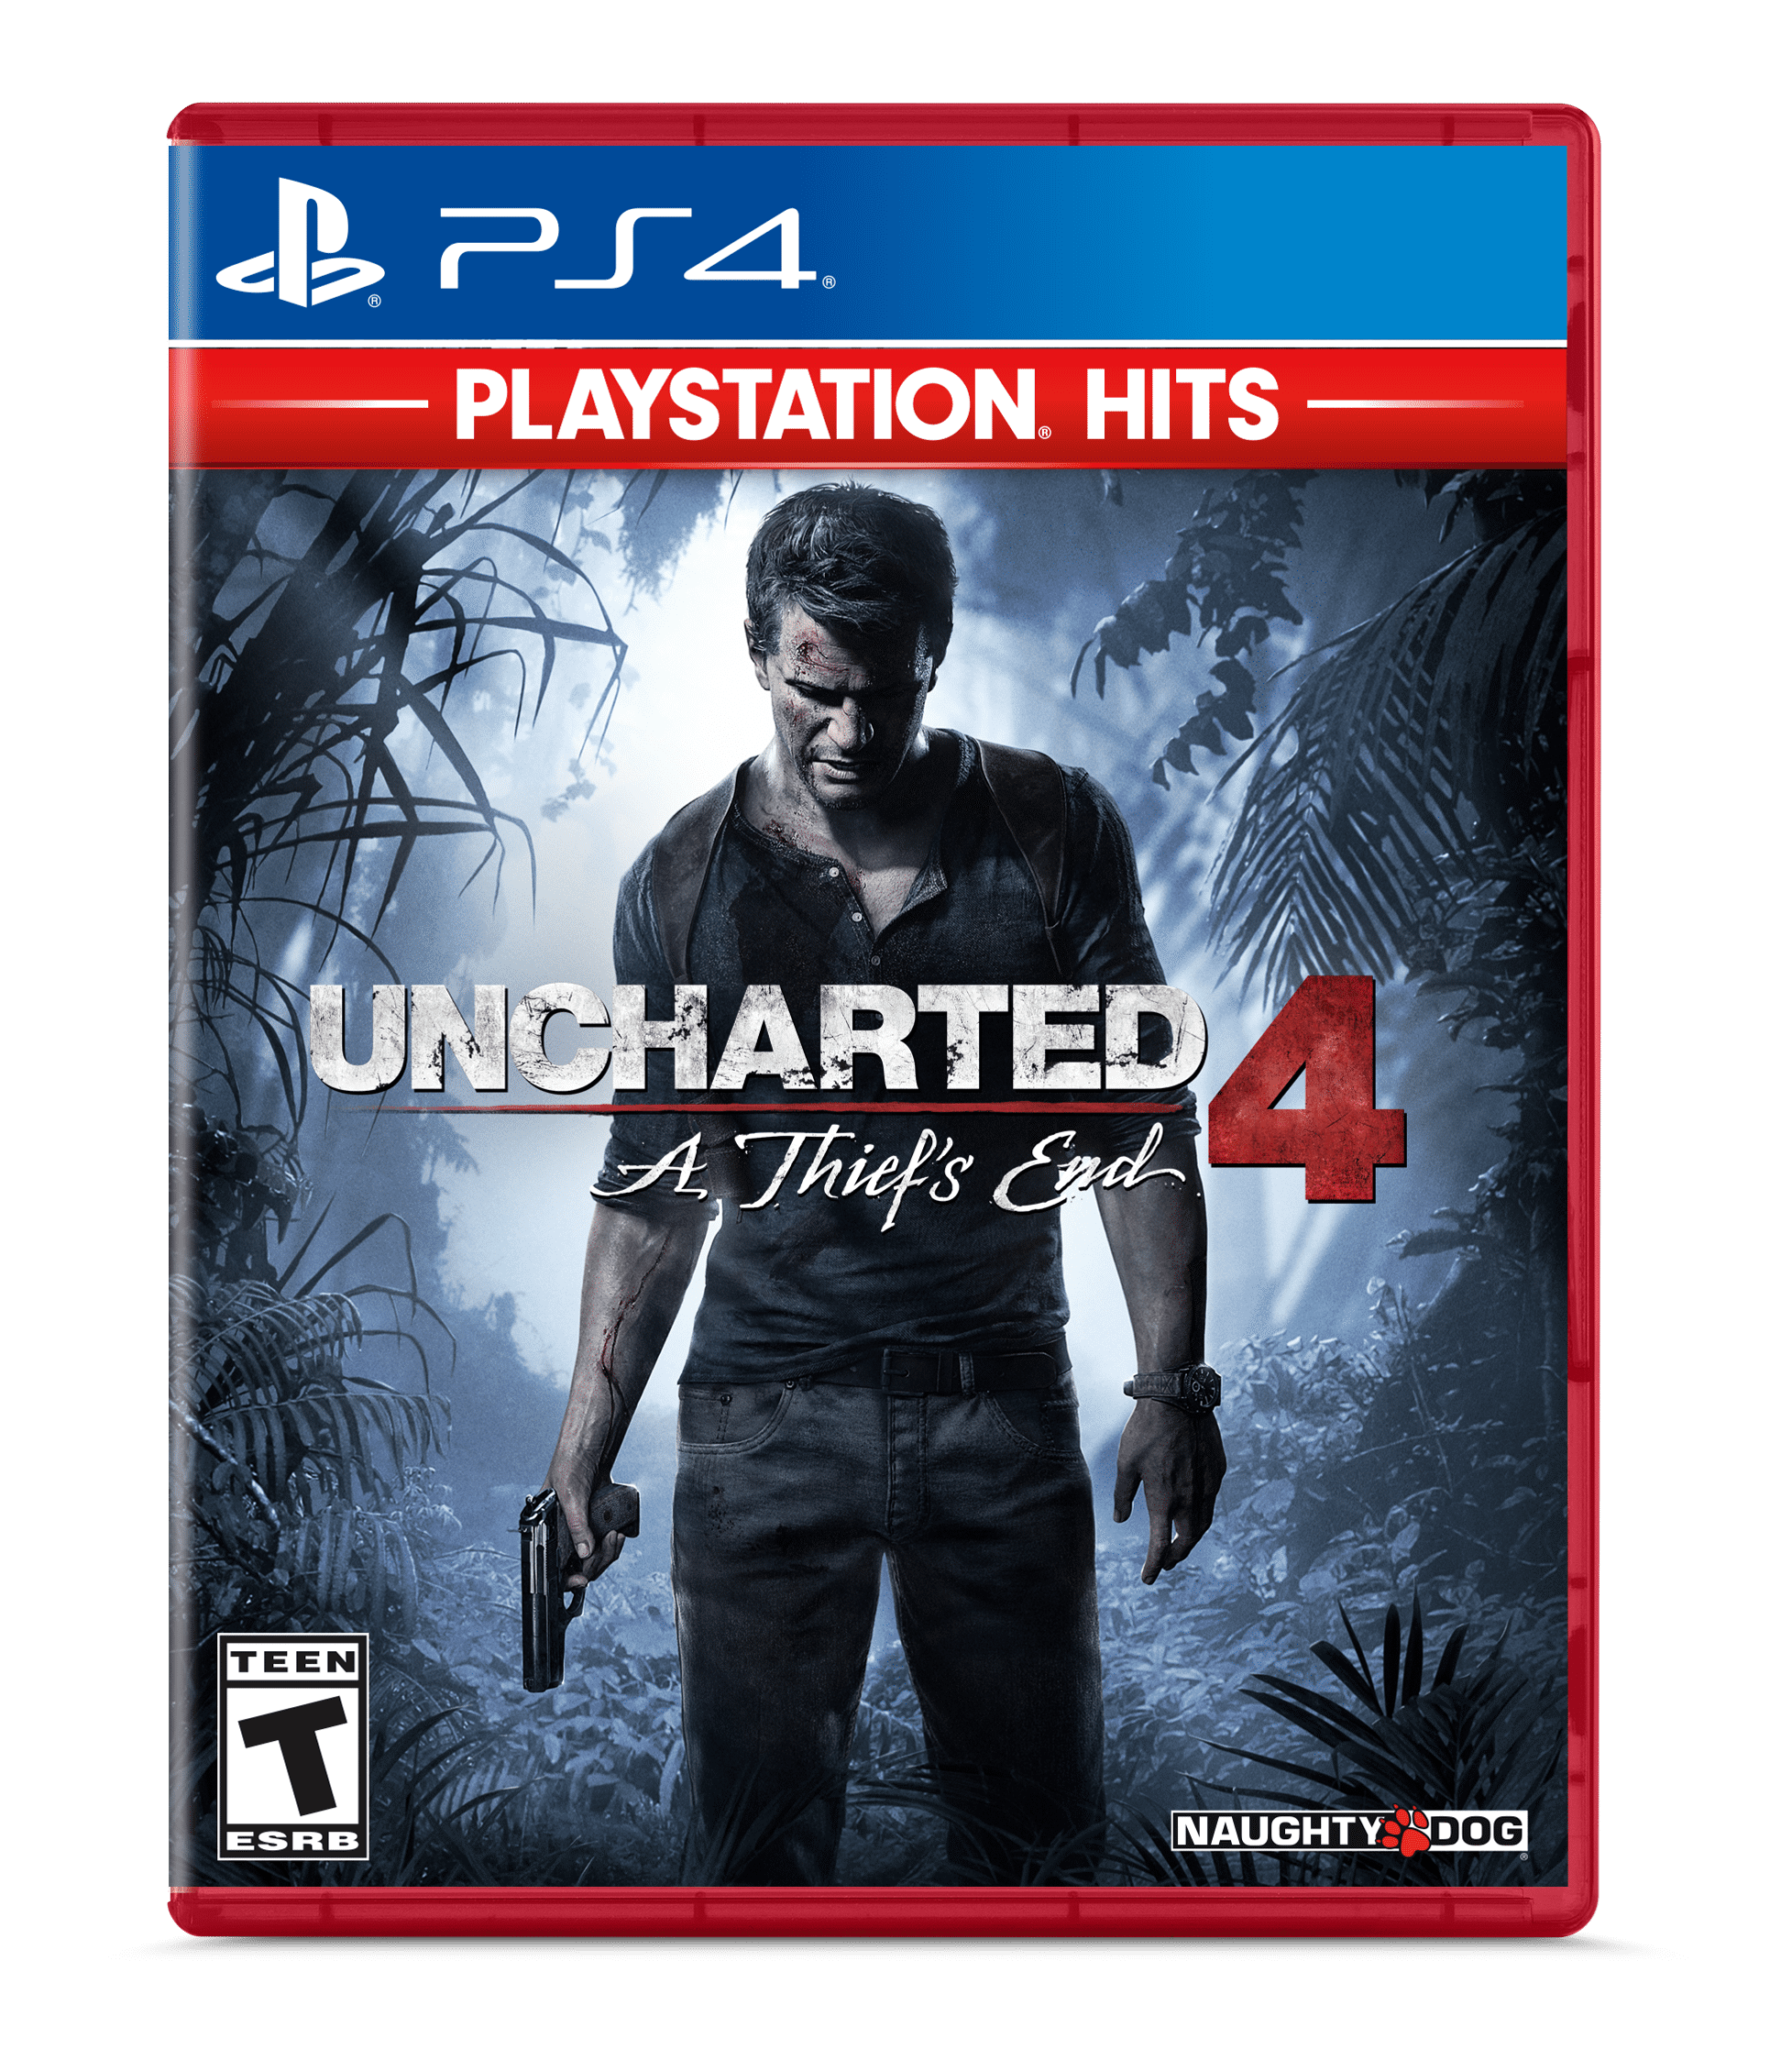 Uncharted 4: A Thief's End - PlayStation Hits, Sony, PlayStation 4,  711719523215